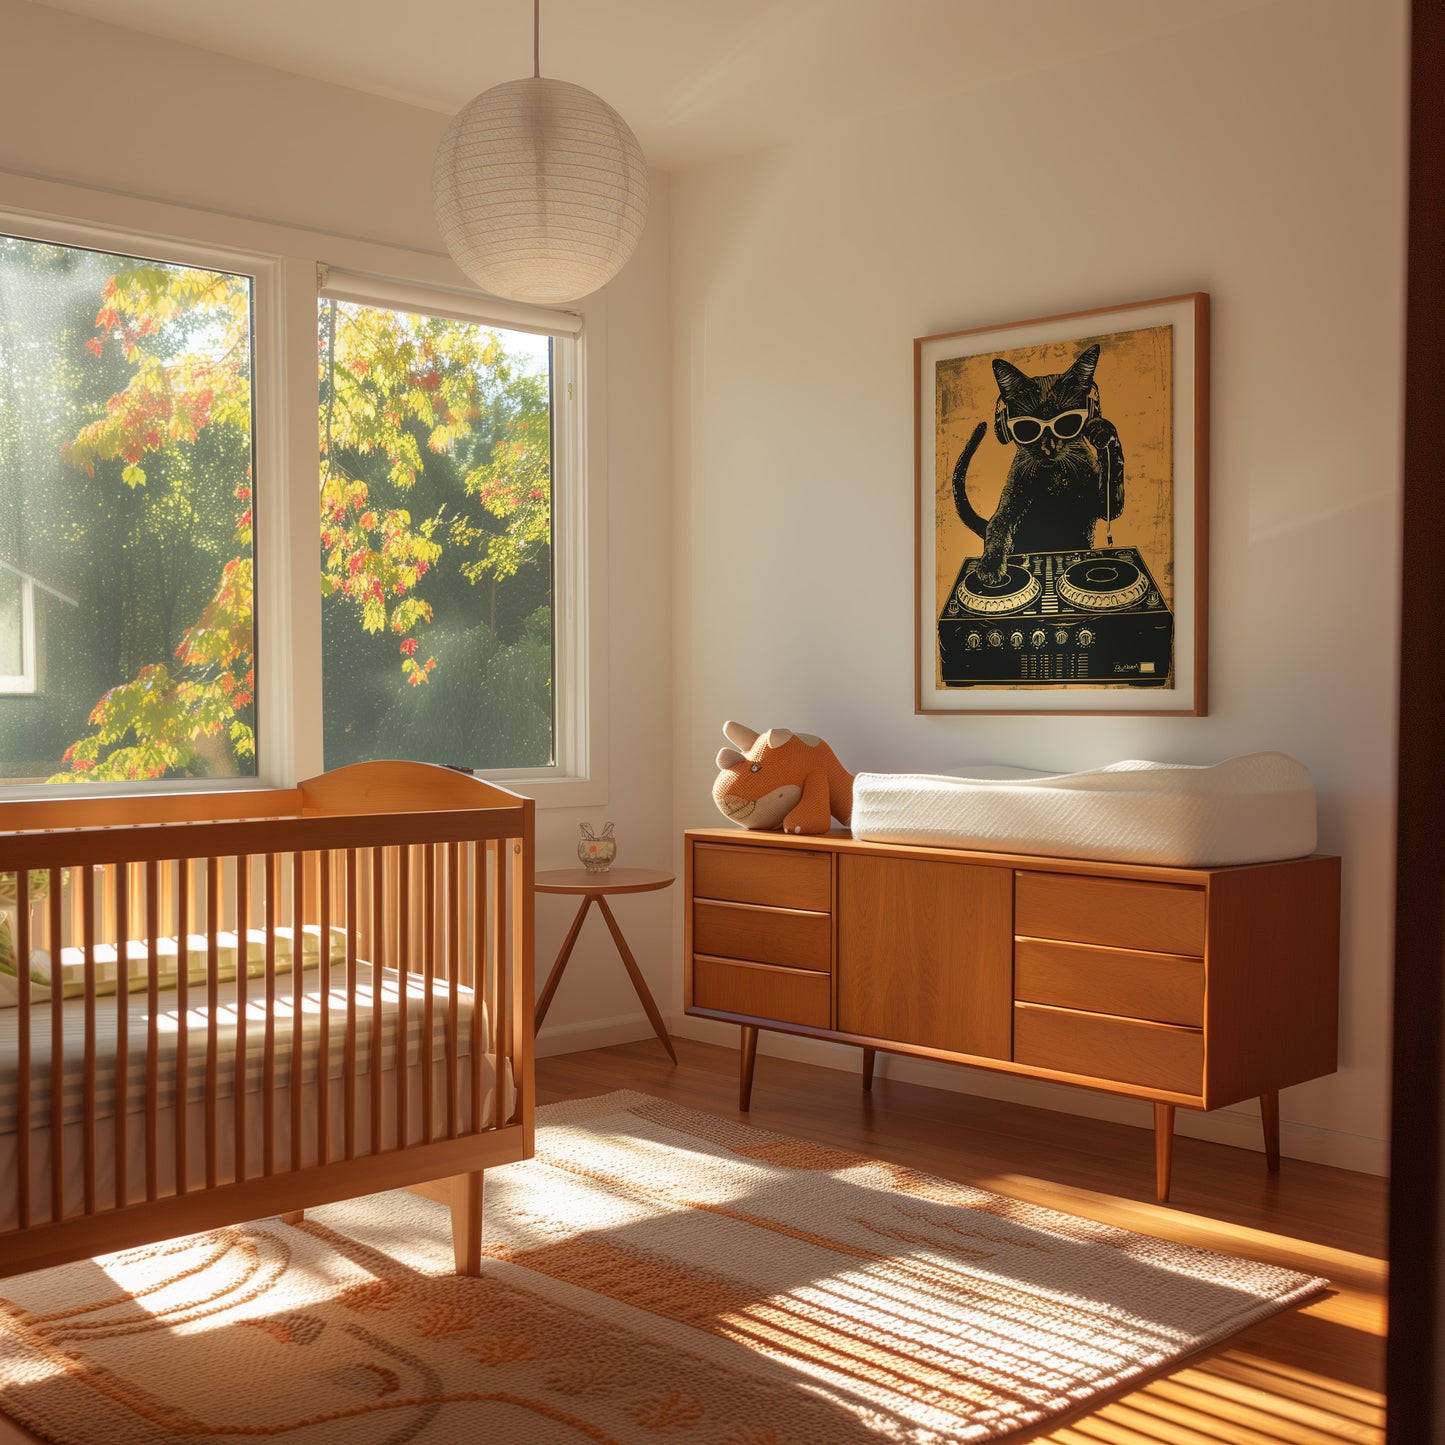 Sunny room with a wooden crib, dresser, and cat illustration on the wall.